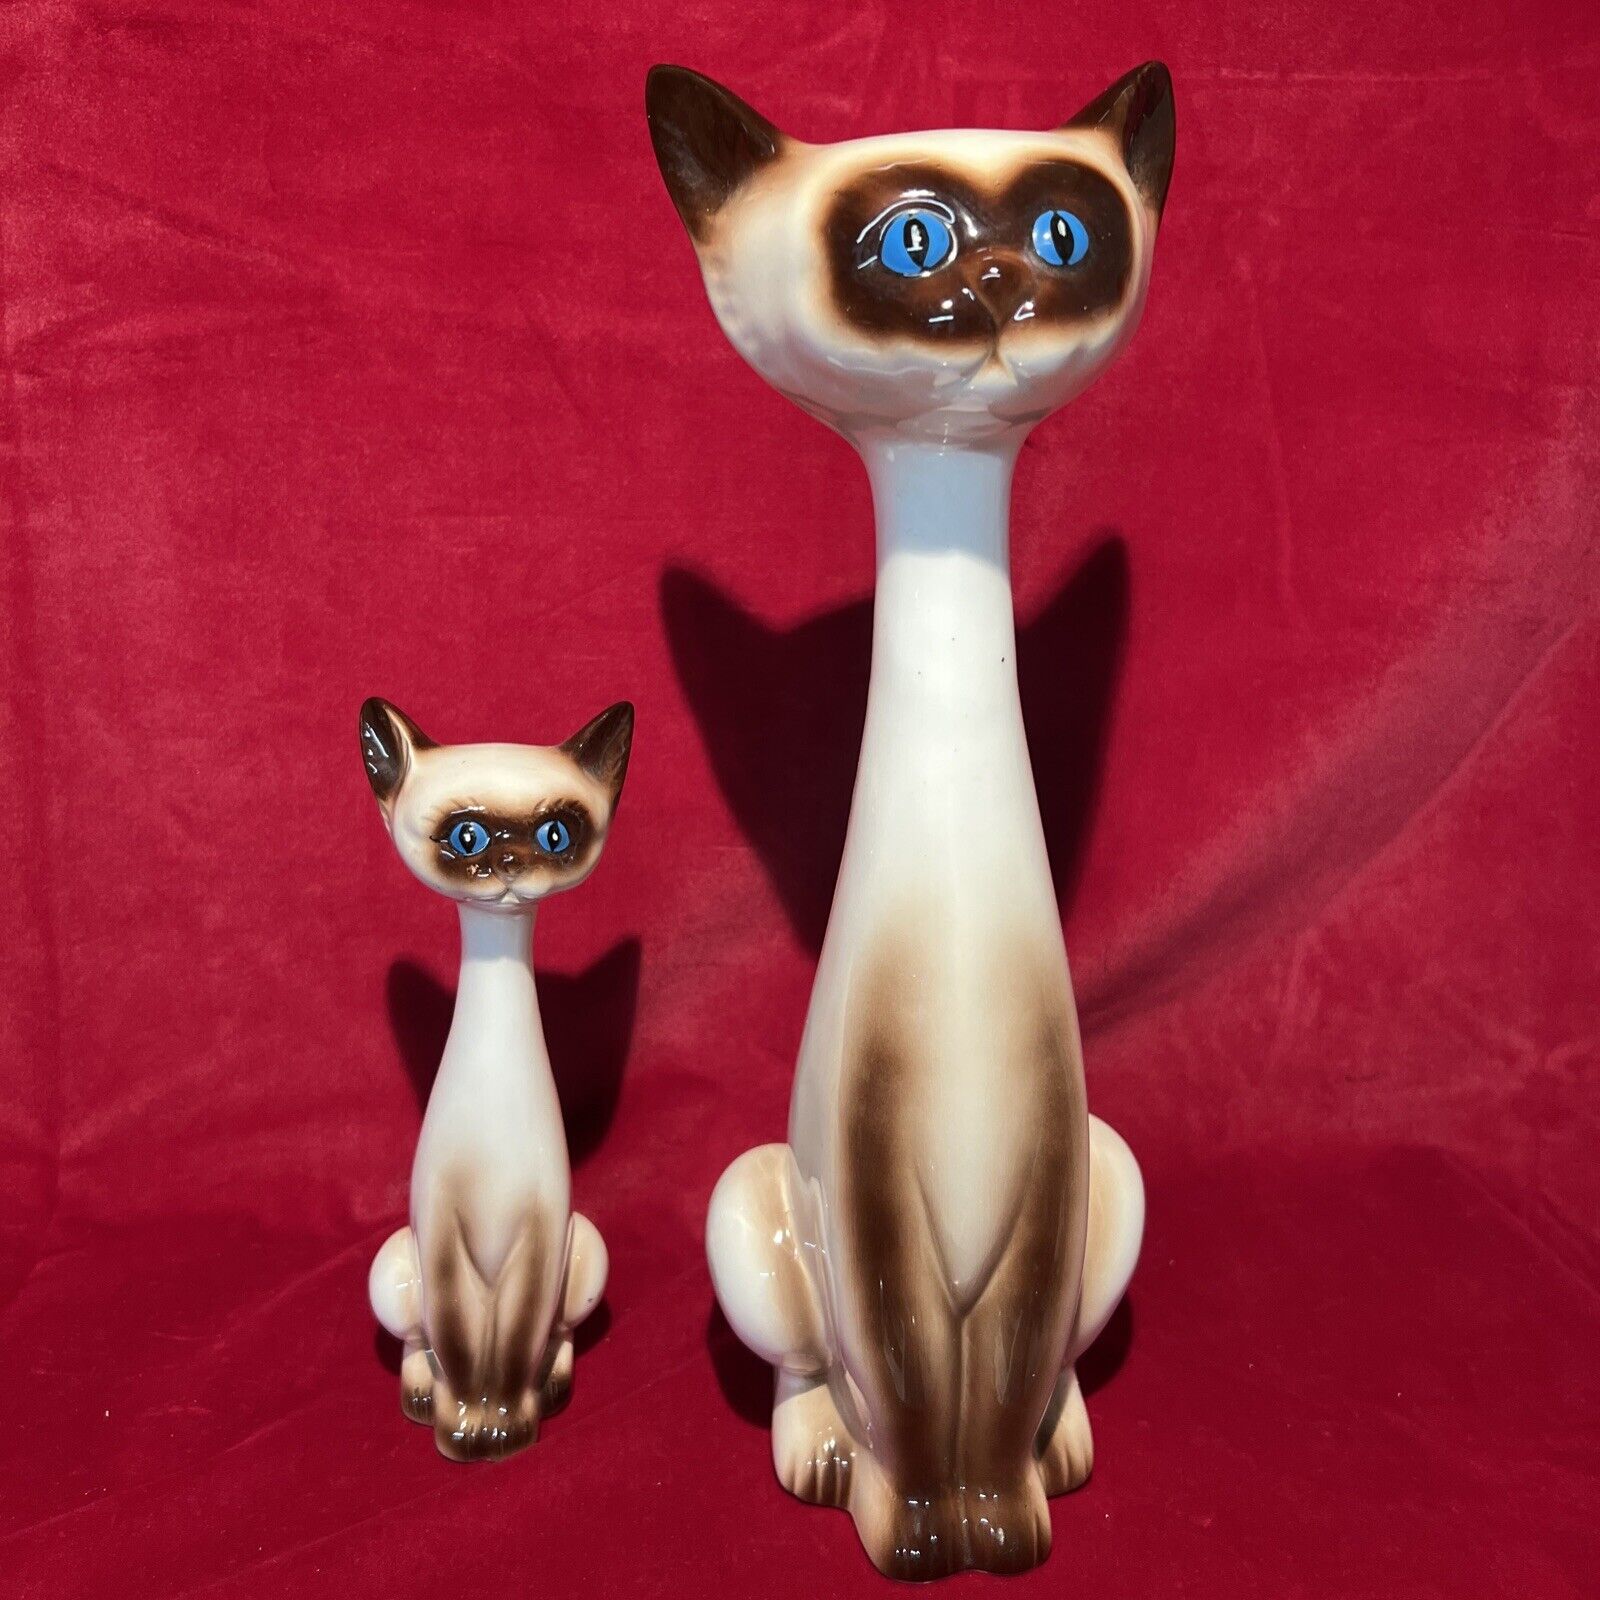 Vintage 1950’s Lefton’s Ceramic Siamese Cat Statues 14” And 8” Tall (Z)